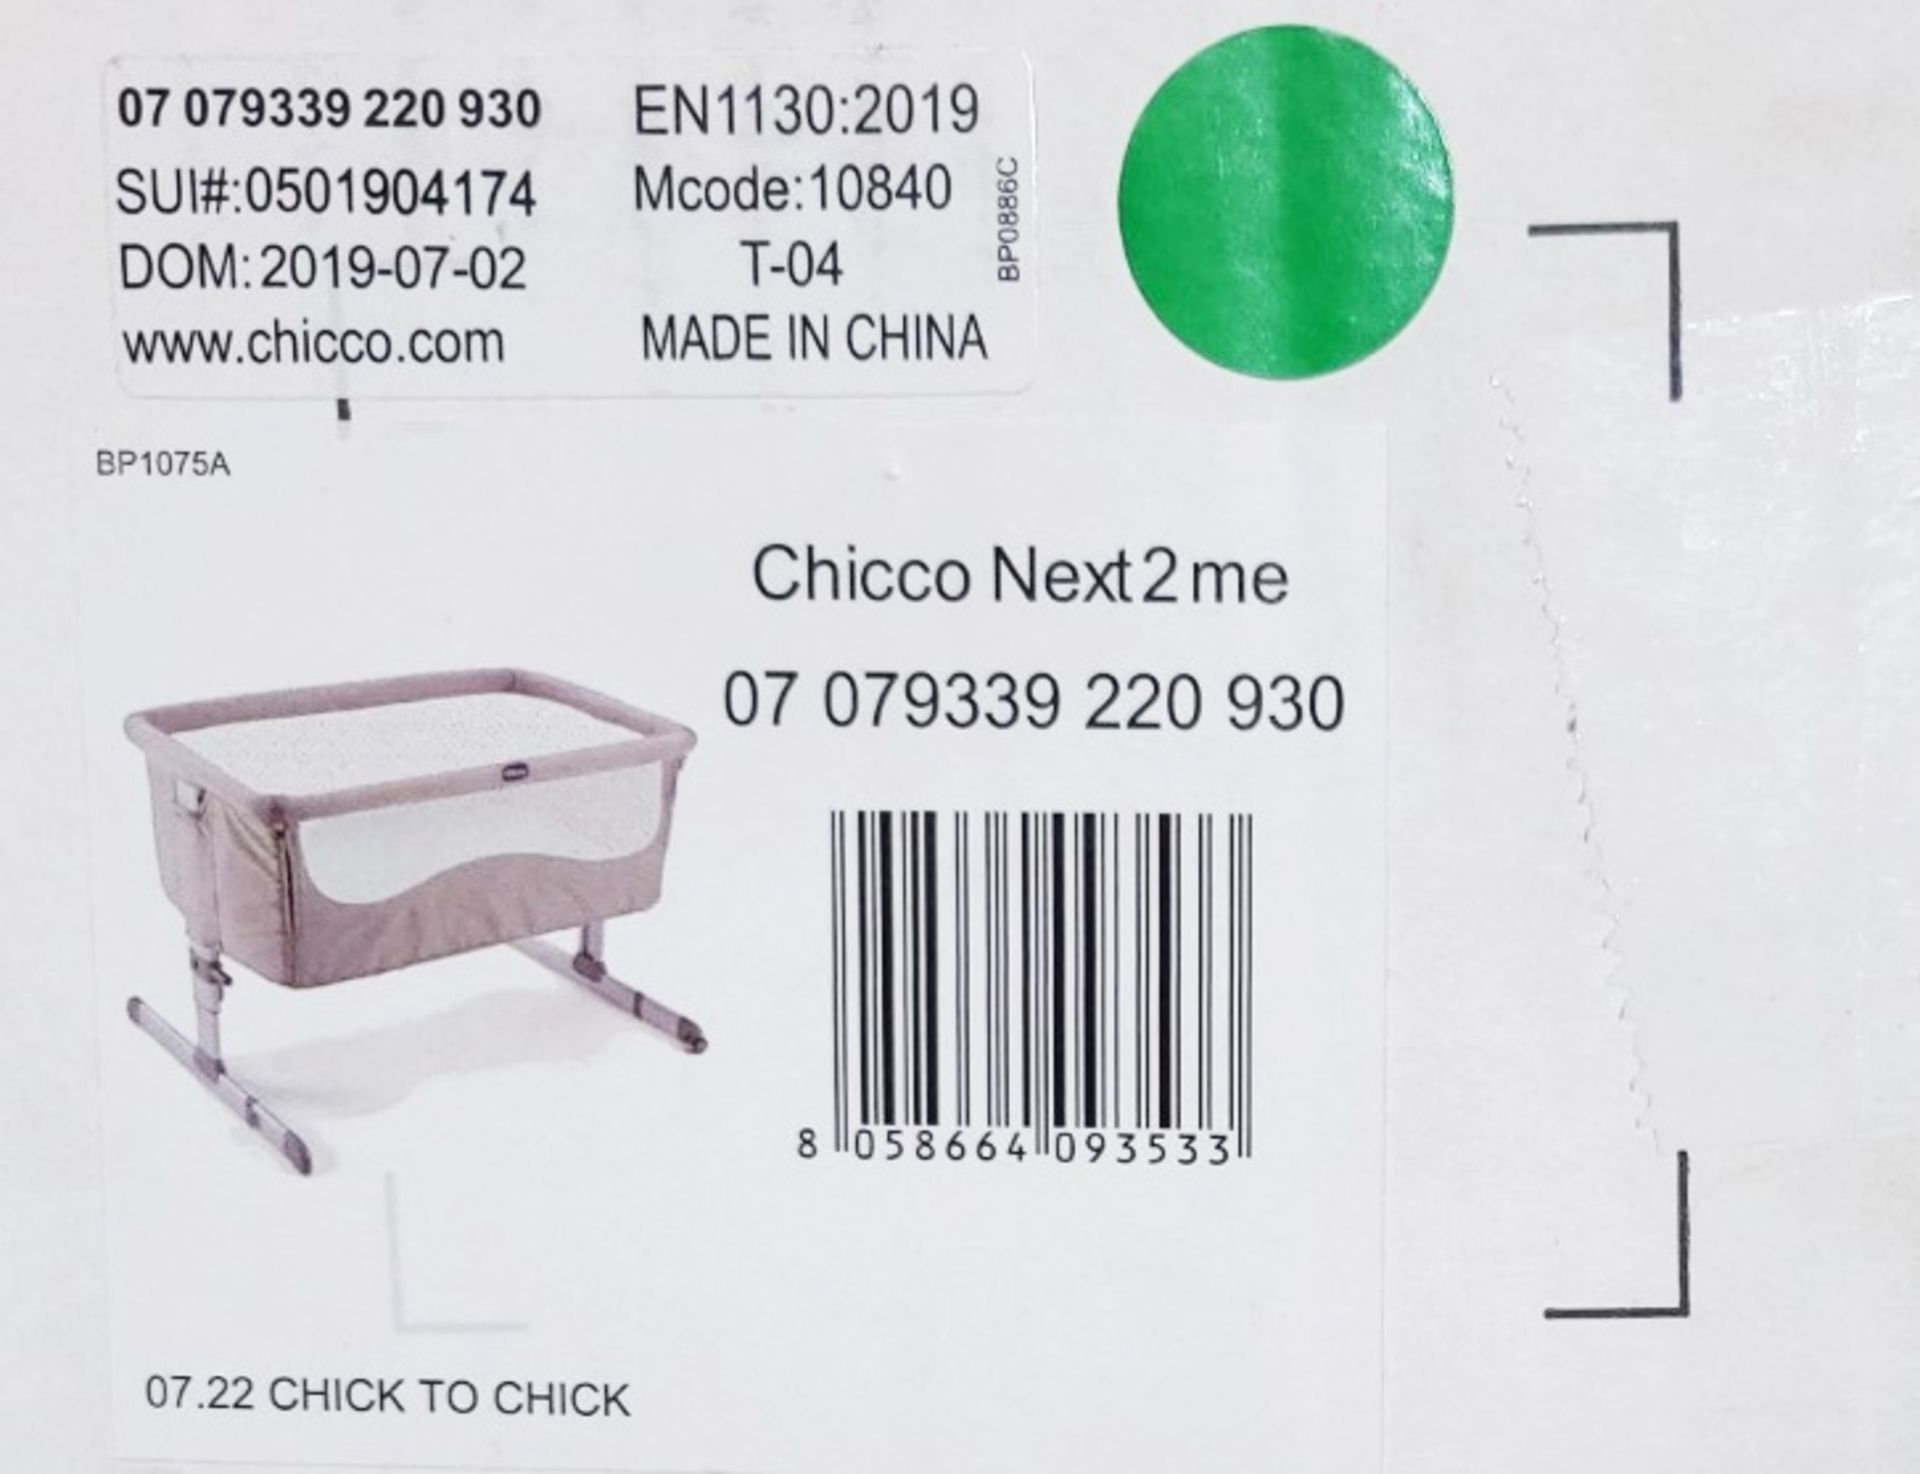 1 x CHICCO Next2me 'Chick to Chick' Bedside Baby Crib With Mattress - New Sealed Stock - RRP £299.00 - Image 2 of 6